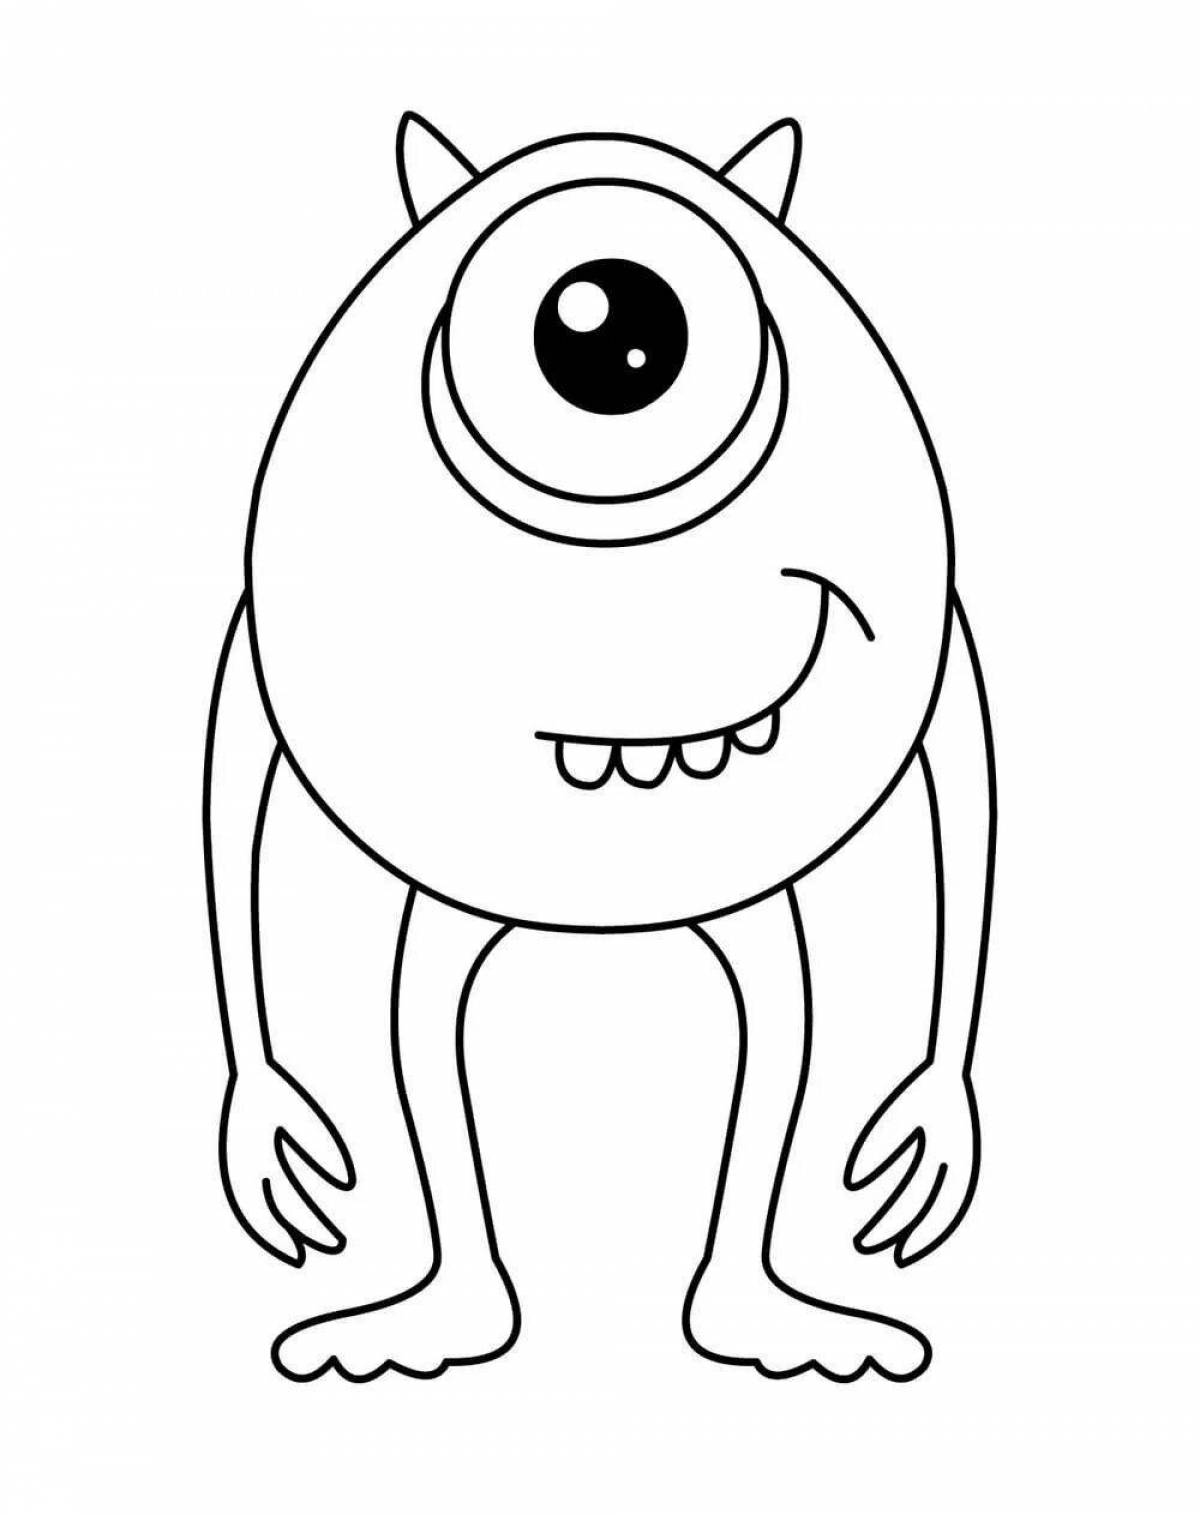 Witty Mike Wazowski coloring page